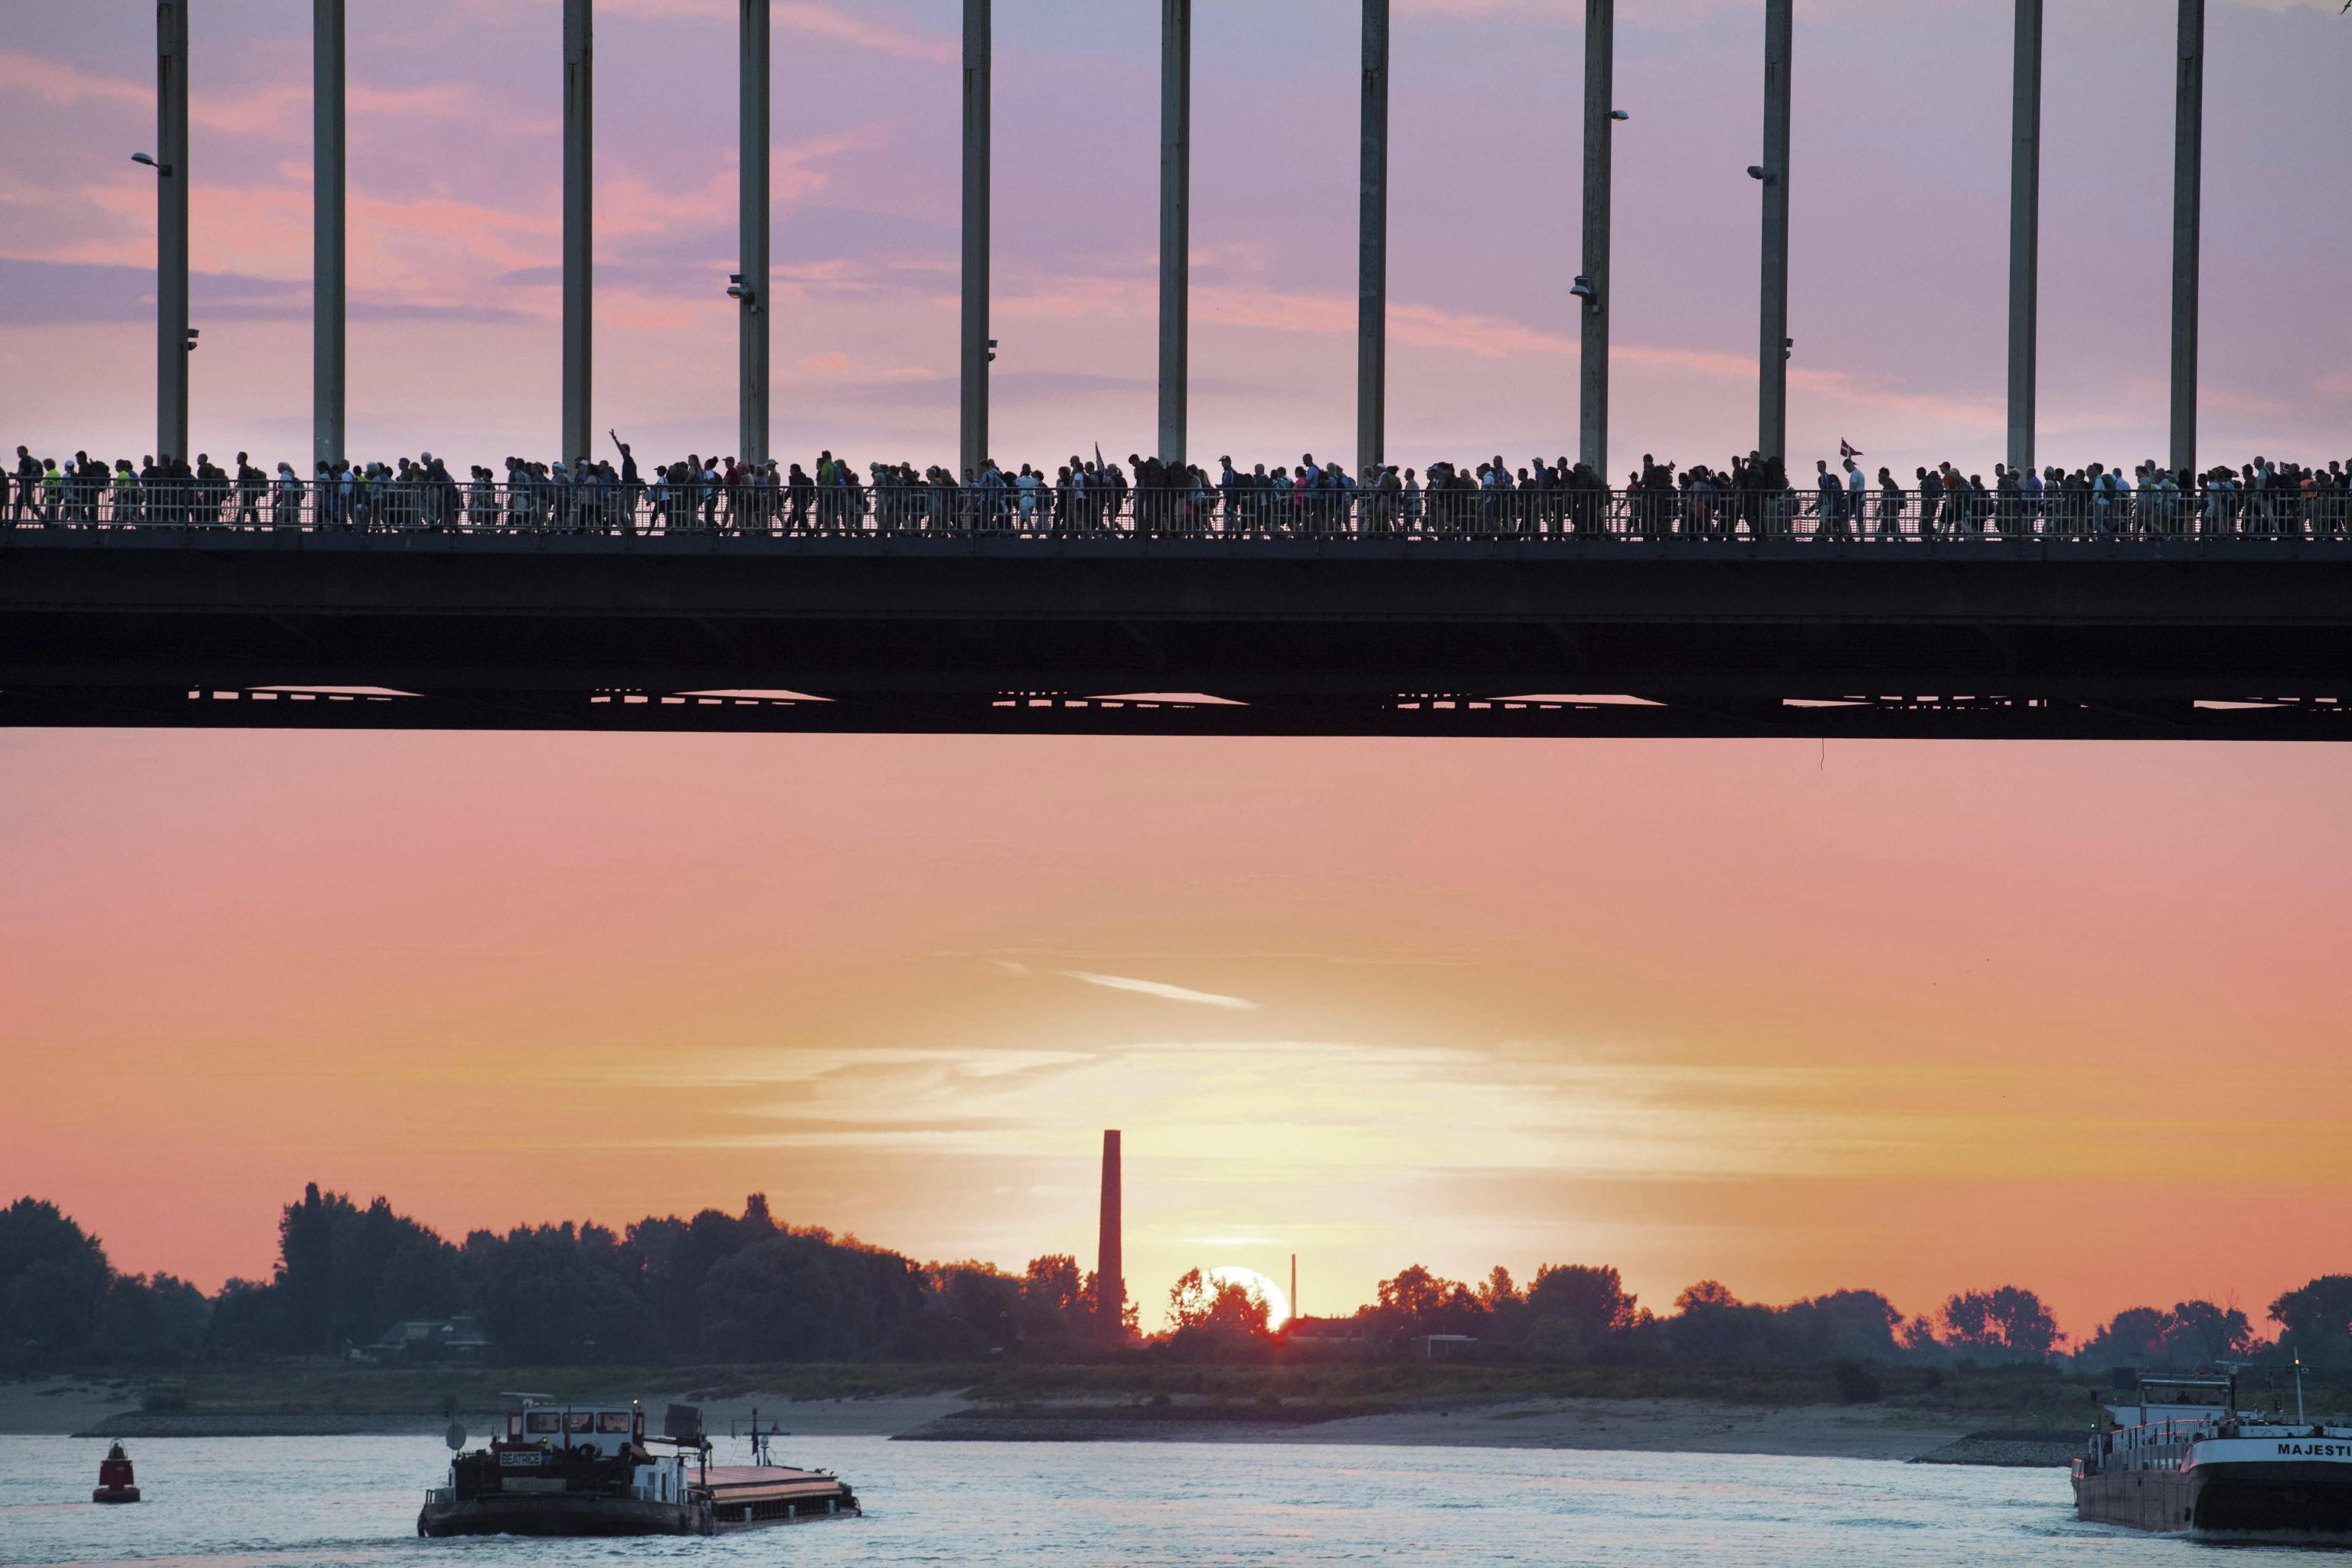 epa06894211 Participants cross a bridge, over the river Waal, during the first day of the 102th edition of the annual Four Days Marches Nijmegen, in Nijmegen, Netherlands, 17 July 2018. The 'Nijmeegse Vierdaagse' is an annual public four-day field march which has been held since 1909 in the third week of July. The event is the largest marching event in the world.  EPA/PIROSCHKA VAN DE WOUW